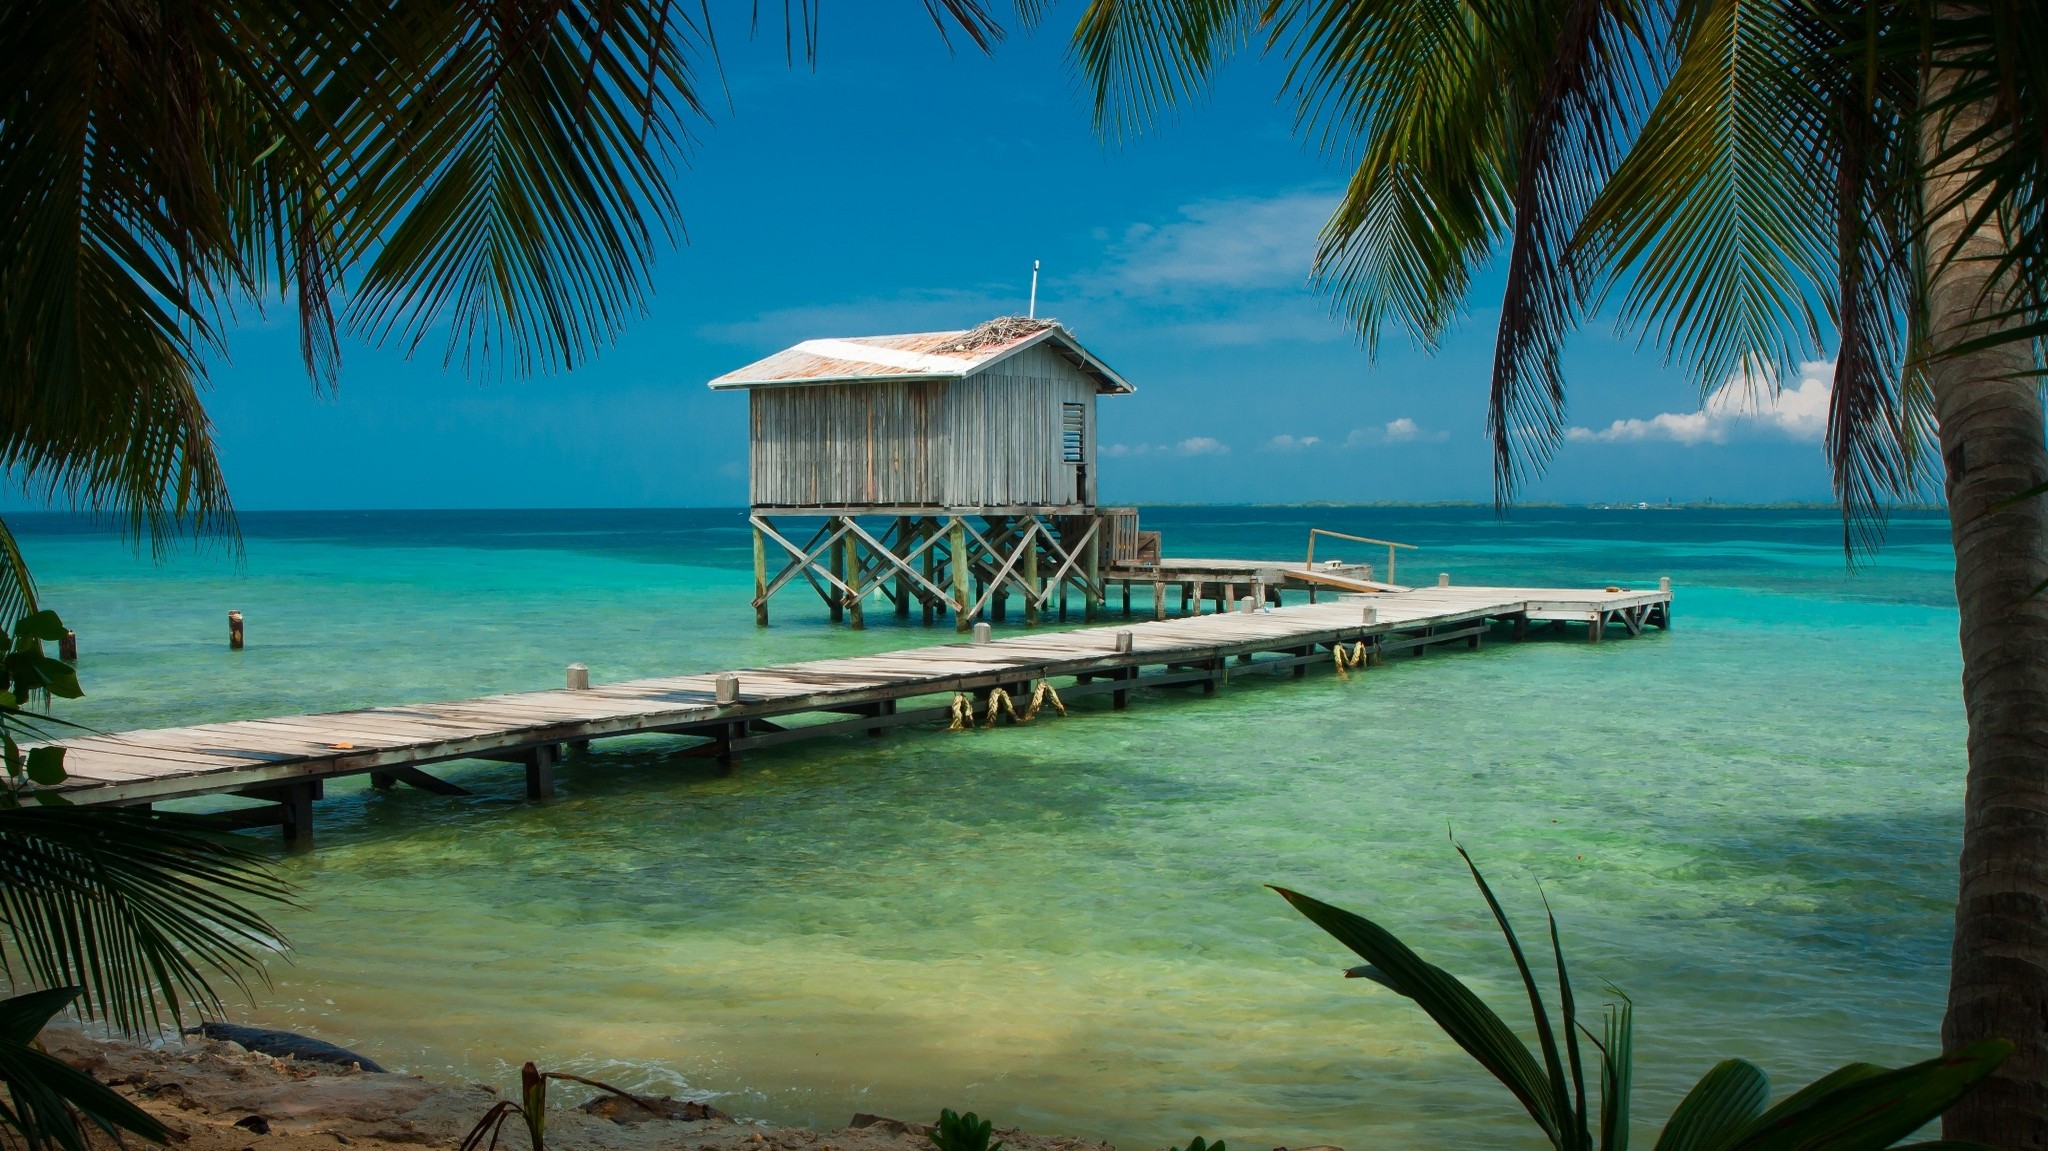 Nature Landscape Beach Tropical Sea Palm Trees Dock Wooden Surface Cabin Turquoise Water Belize Barc 2048x1151